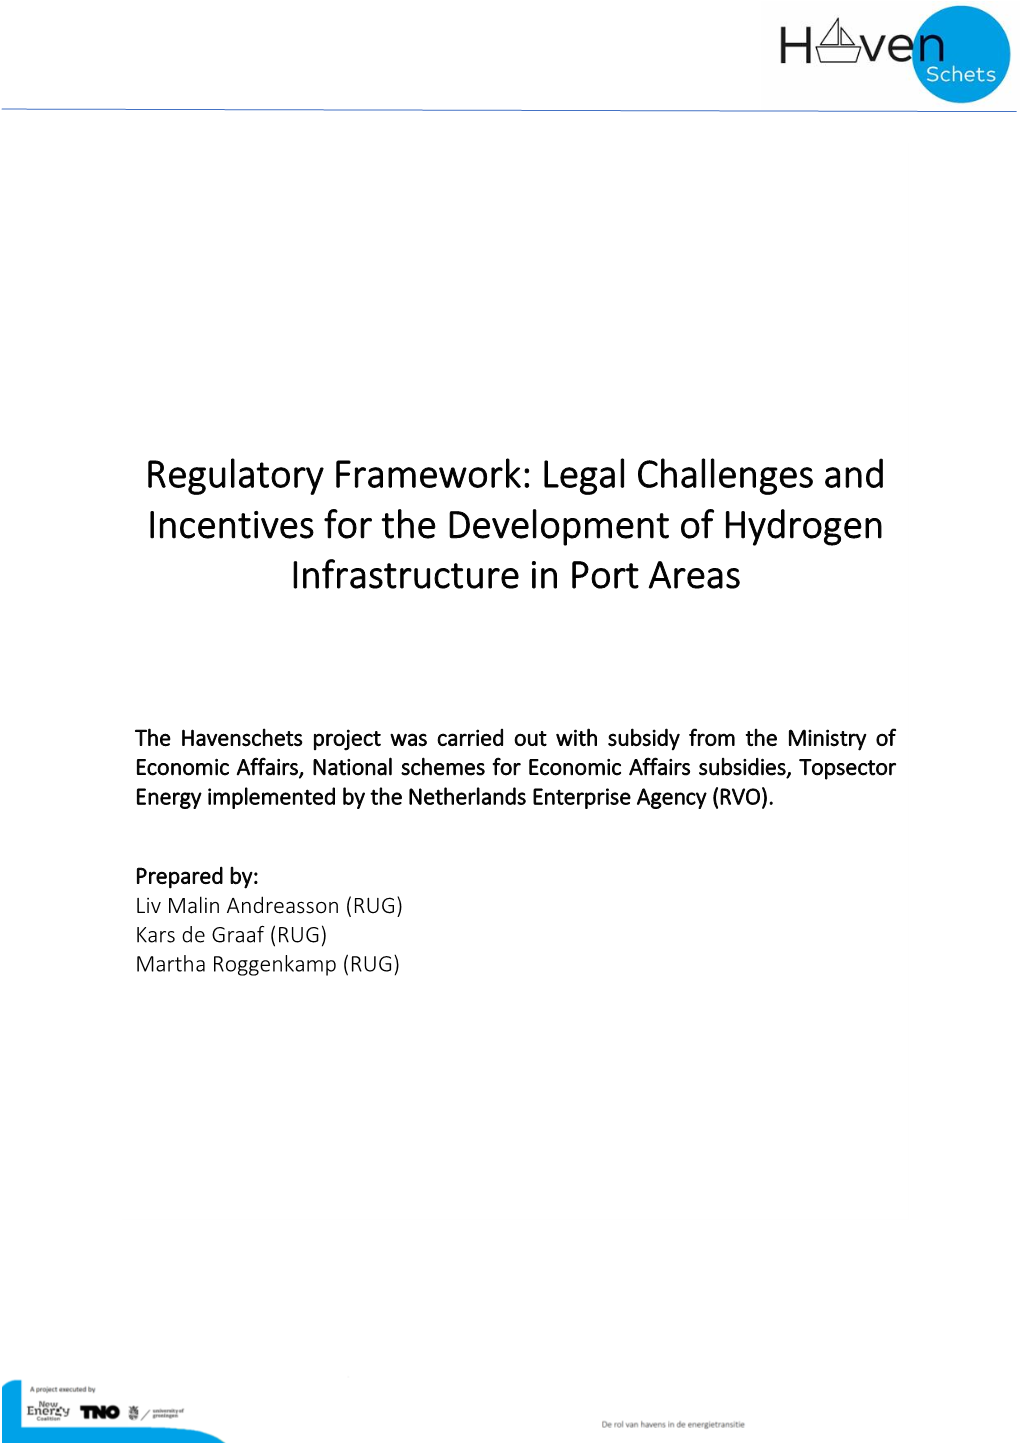 Regulatory Framework: Legal Challenges and Incentives for the Development of Hydrogen Infrastructure in Port Areas